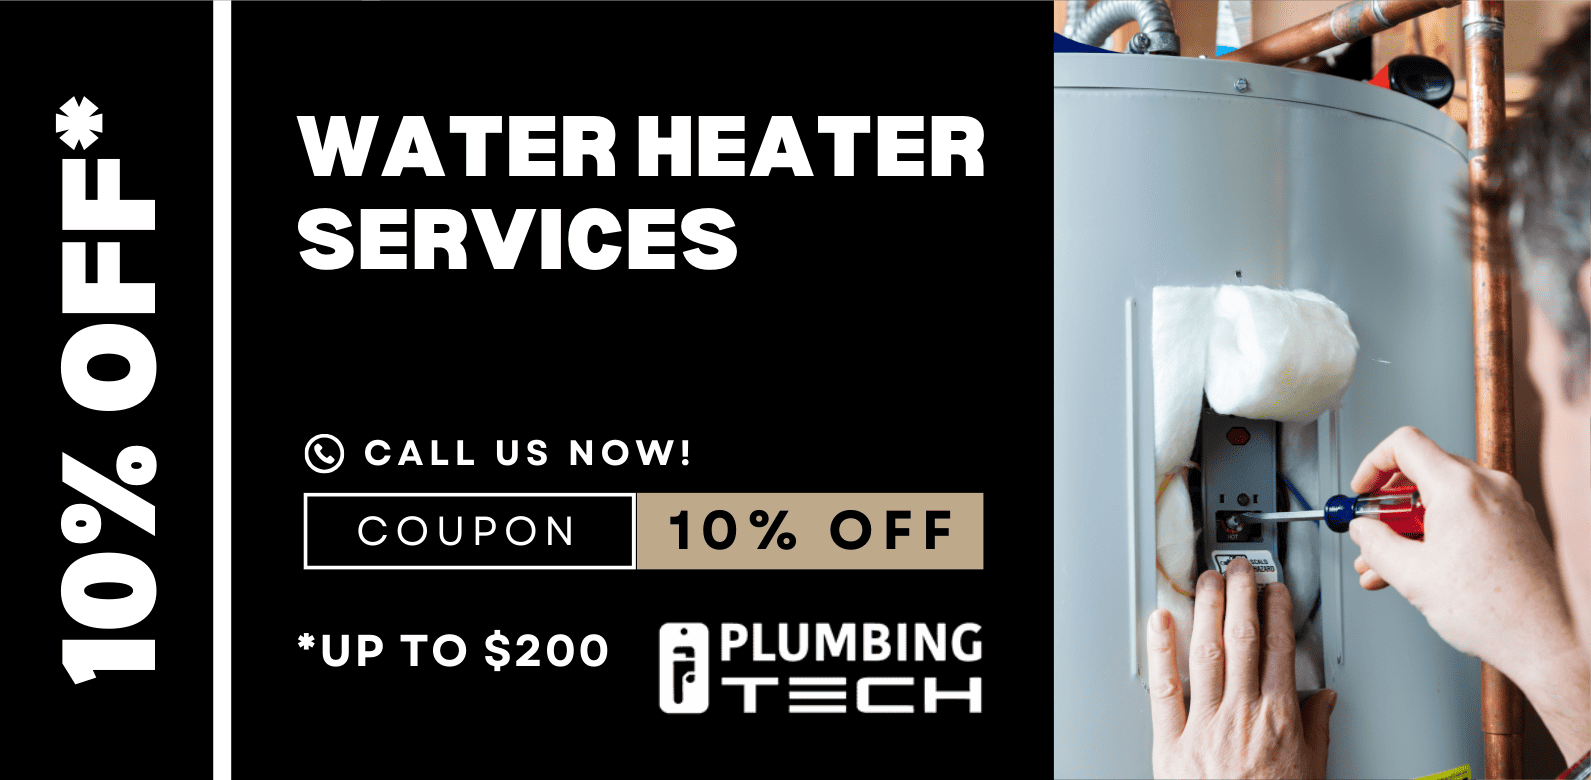 Water Heater Services Coupon